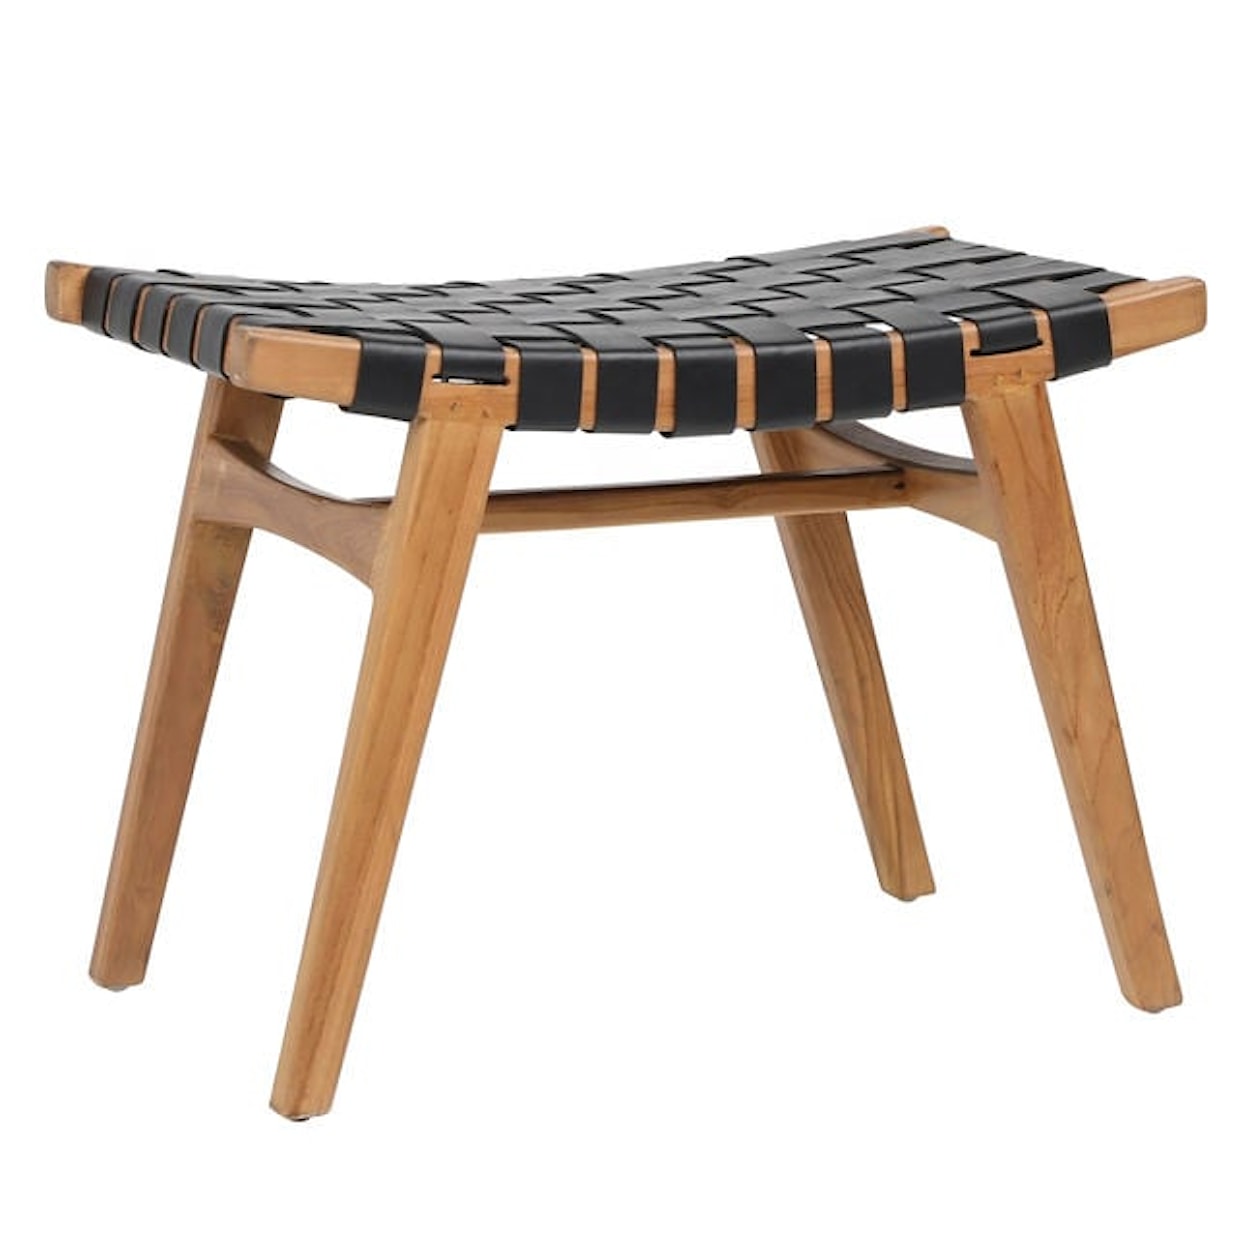 Dovetail Furniture Dovetail Accessories Camila Stool W/ Natural Wood Frame